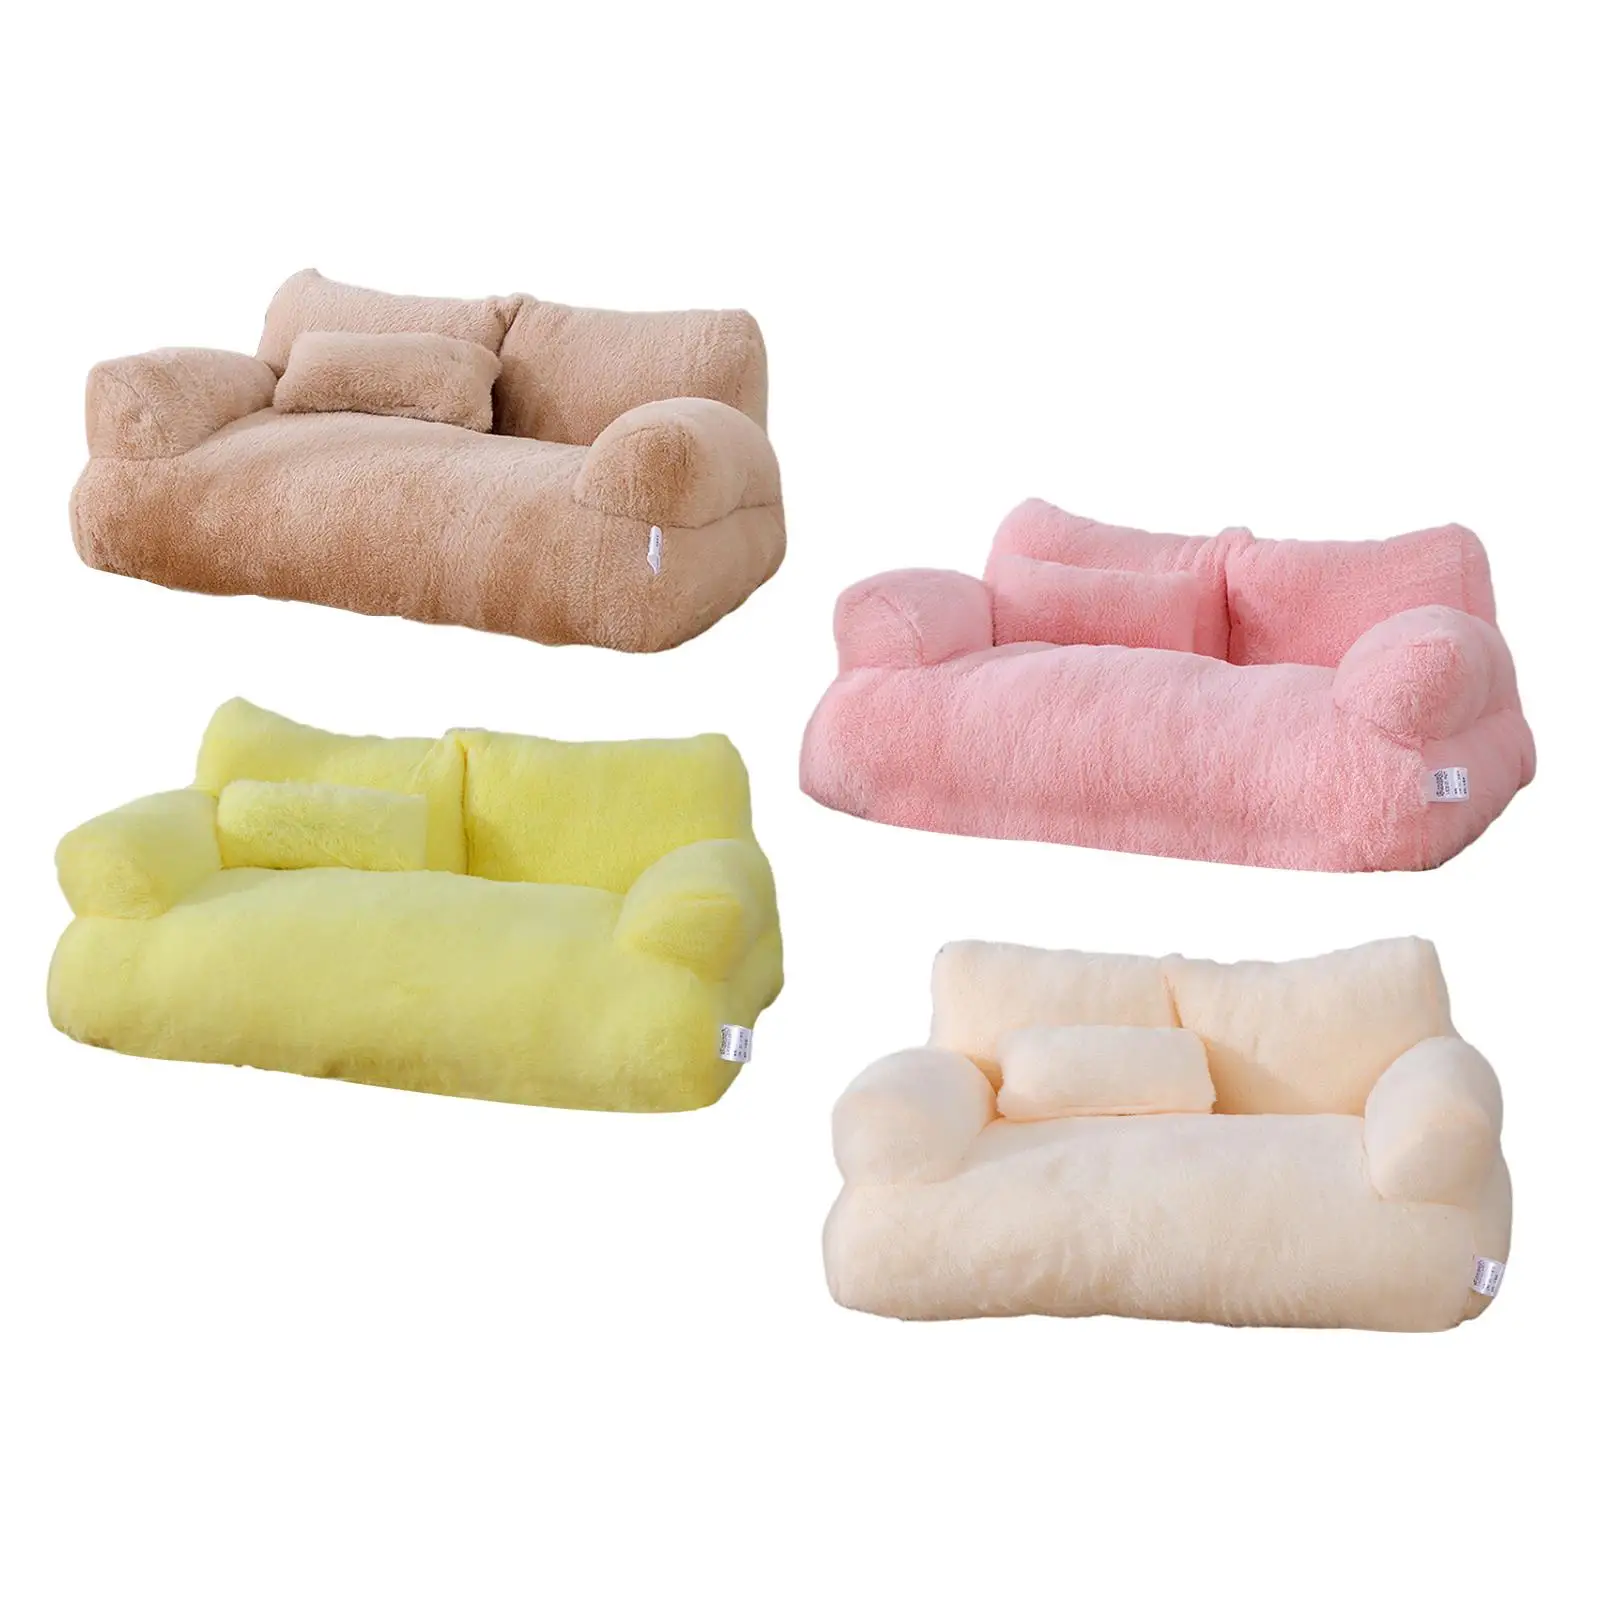 Pet Sofa Cat Sofa Fashion Nonslip Bottom Dog Couch Dog Beds for Cats and Small